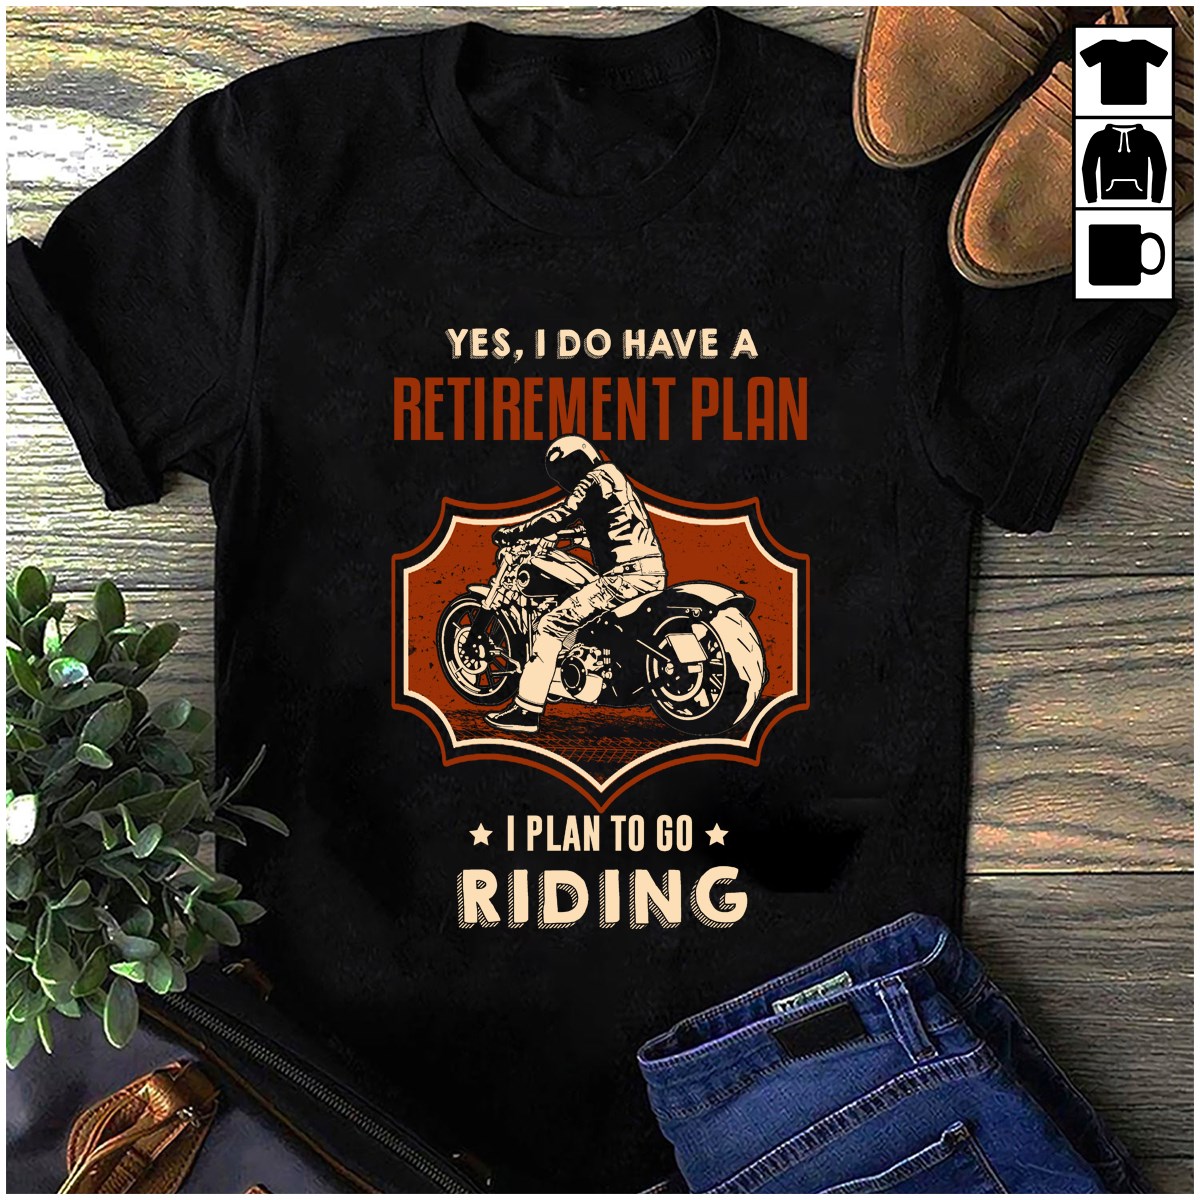 yes, i do have a retirement plan. i plan to go riding